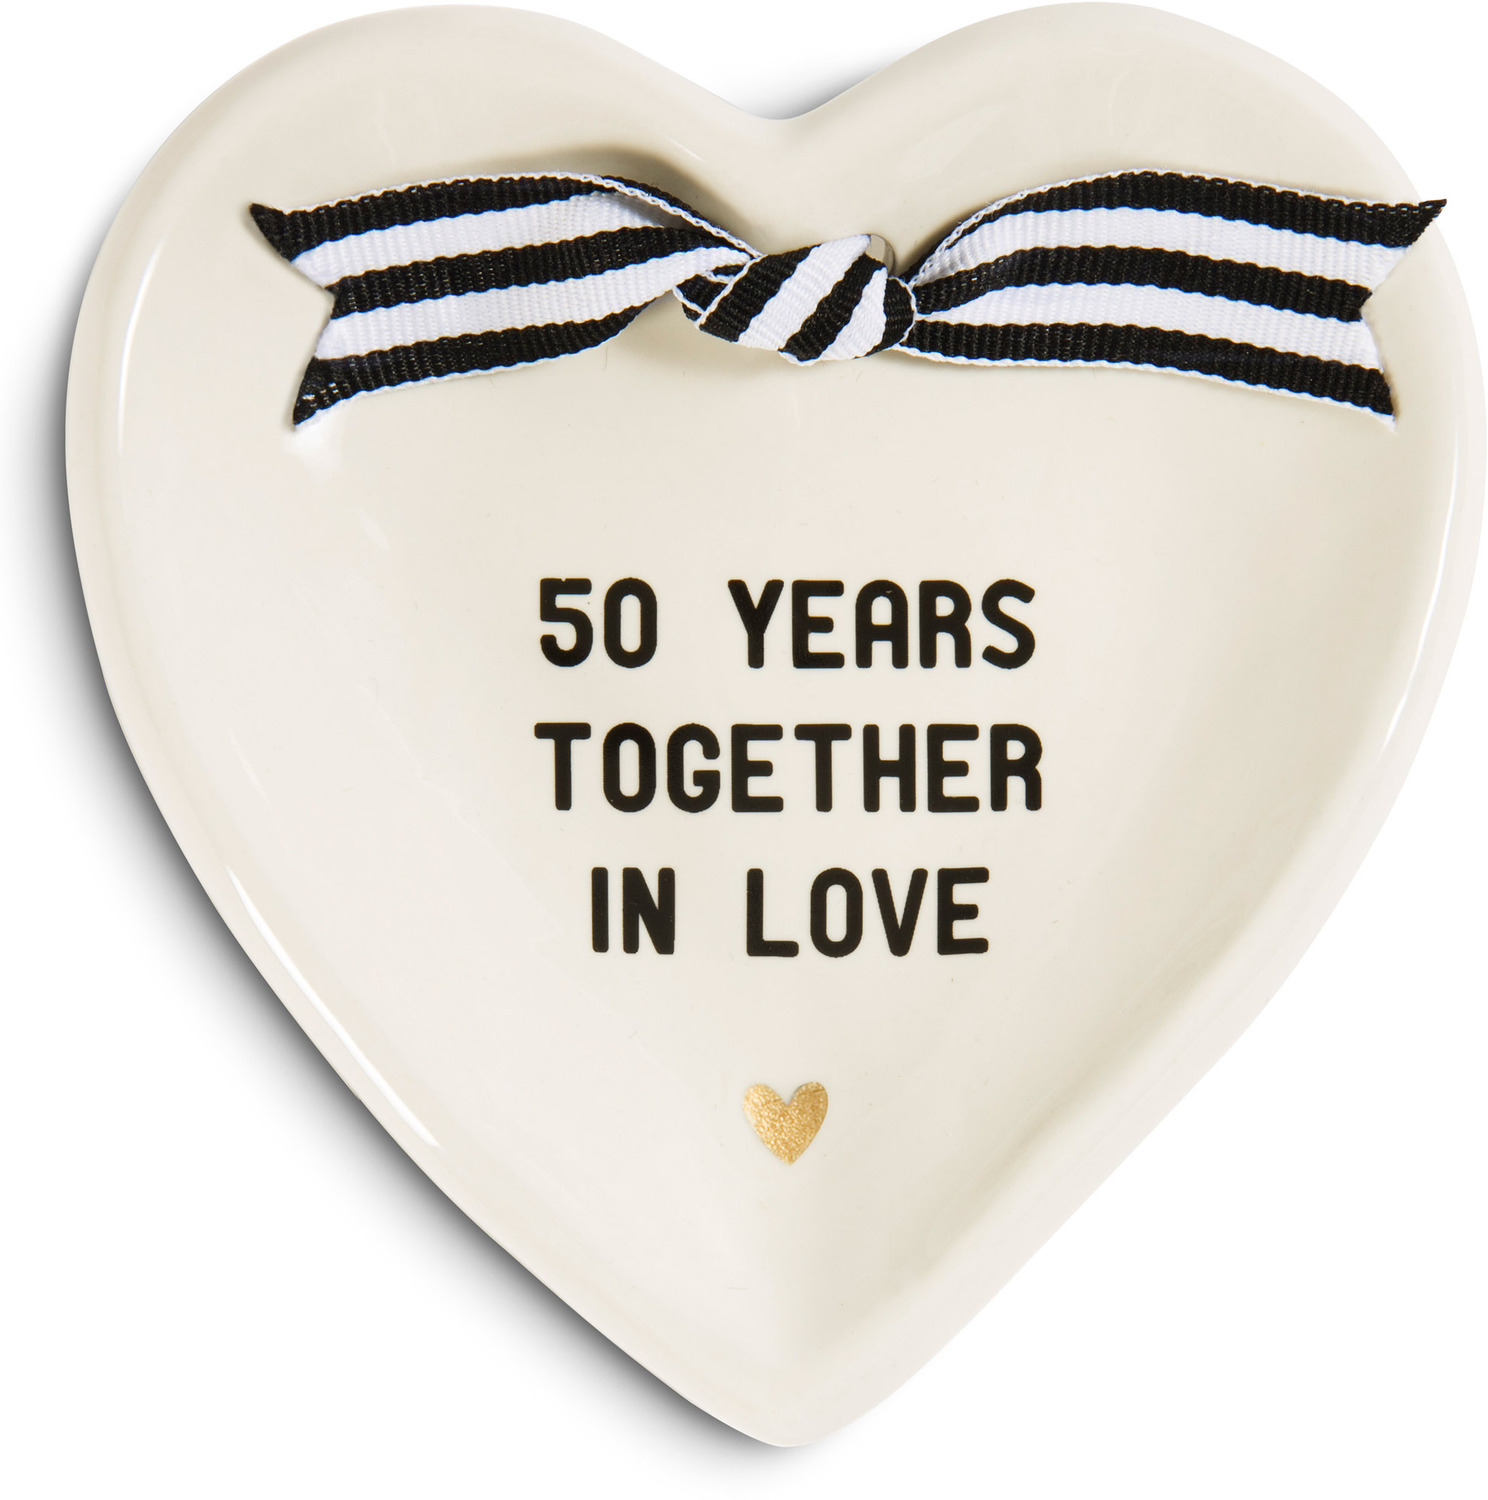 50th Anniversary by The Milestone Collection - 50th Anniversary - 4.5" x 4.5" Heart-Shaped Keepsake Dish